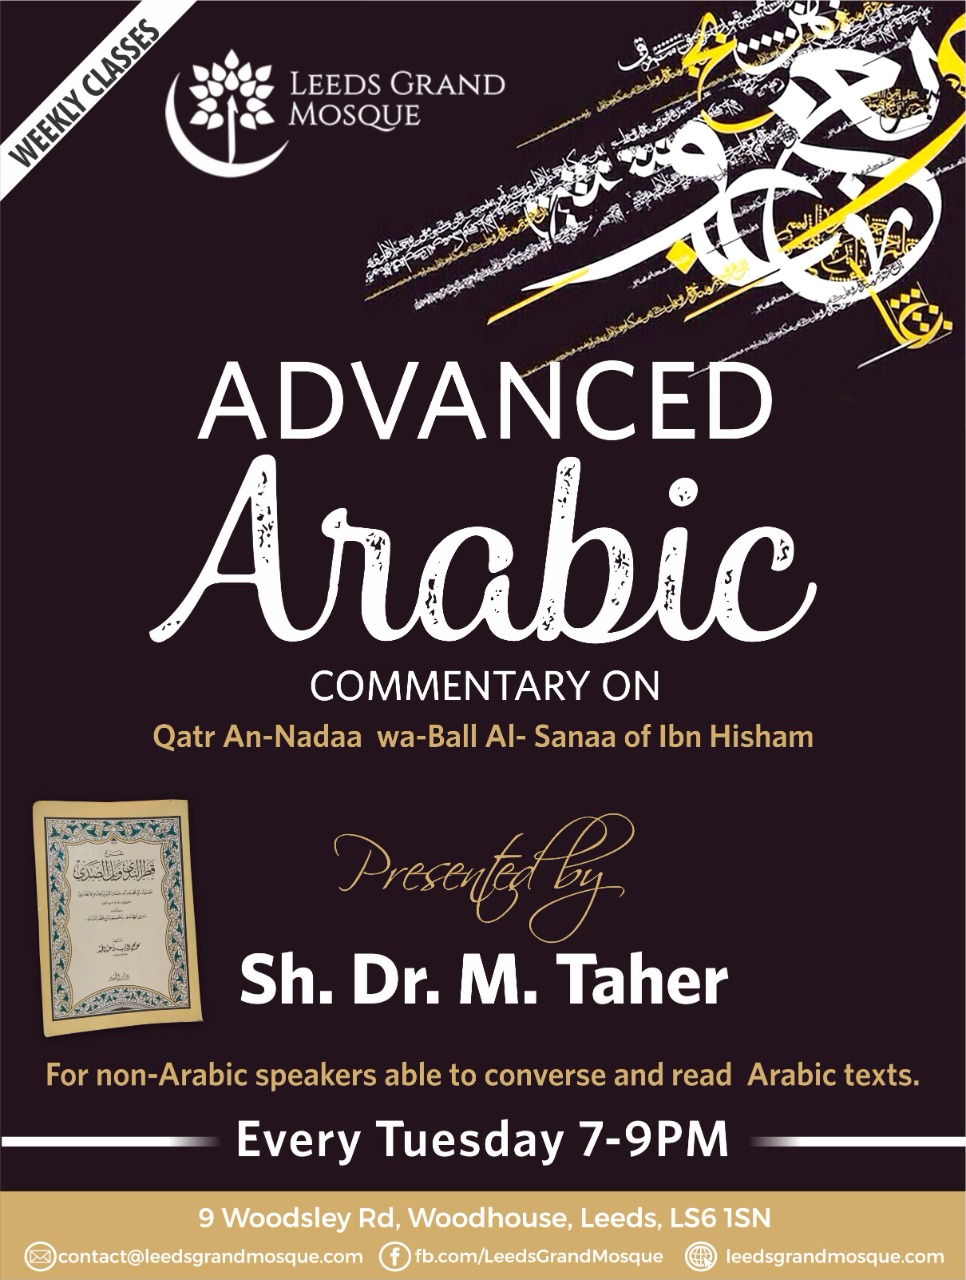 Advanced Arabic Class with Sheikh Dr Taher at Leeds Grand Mosque